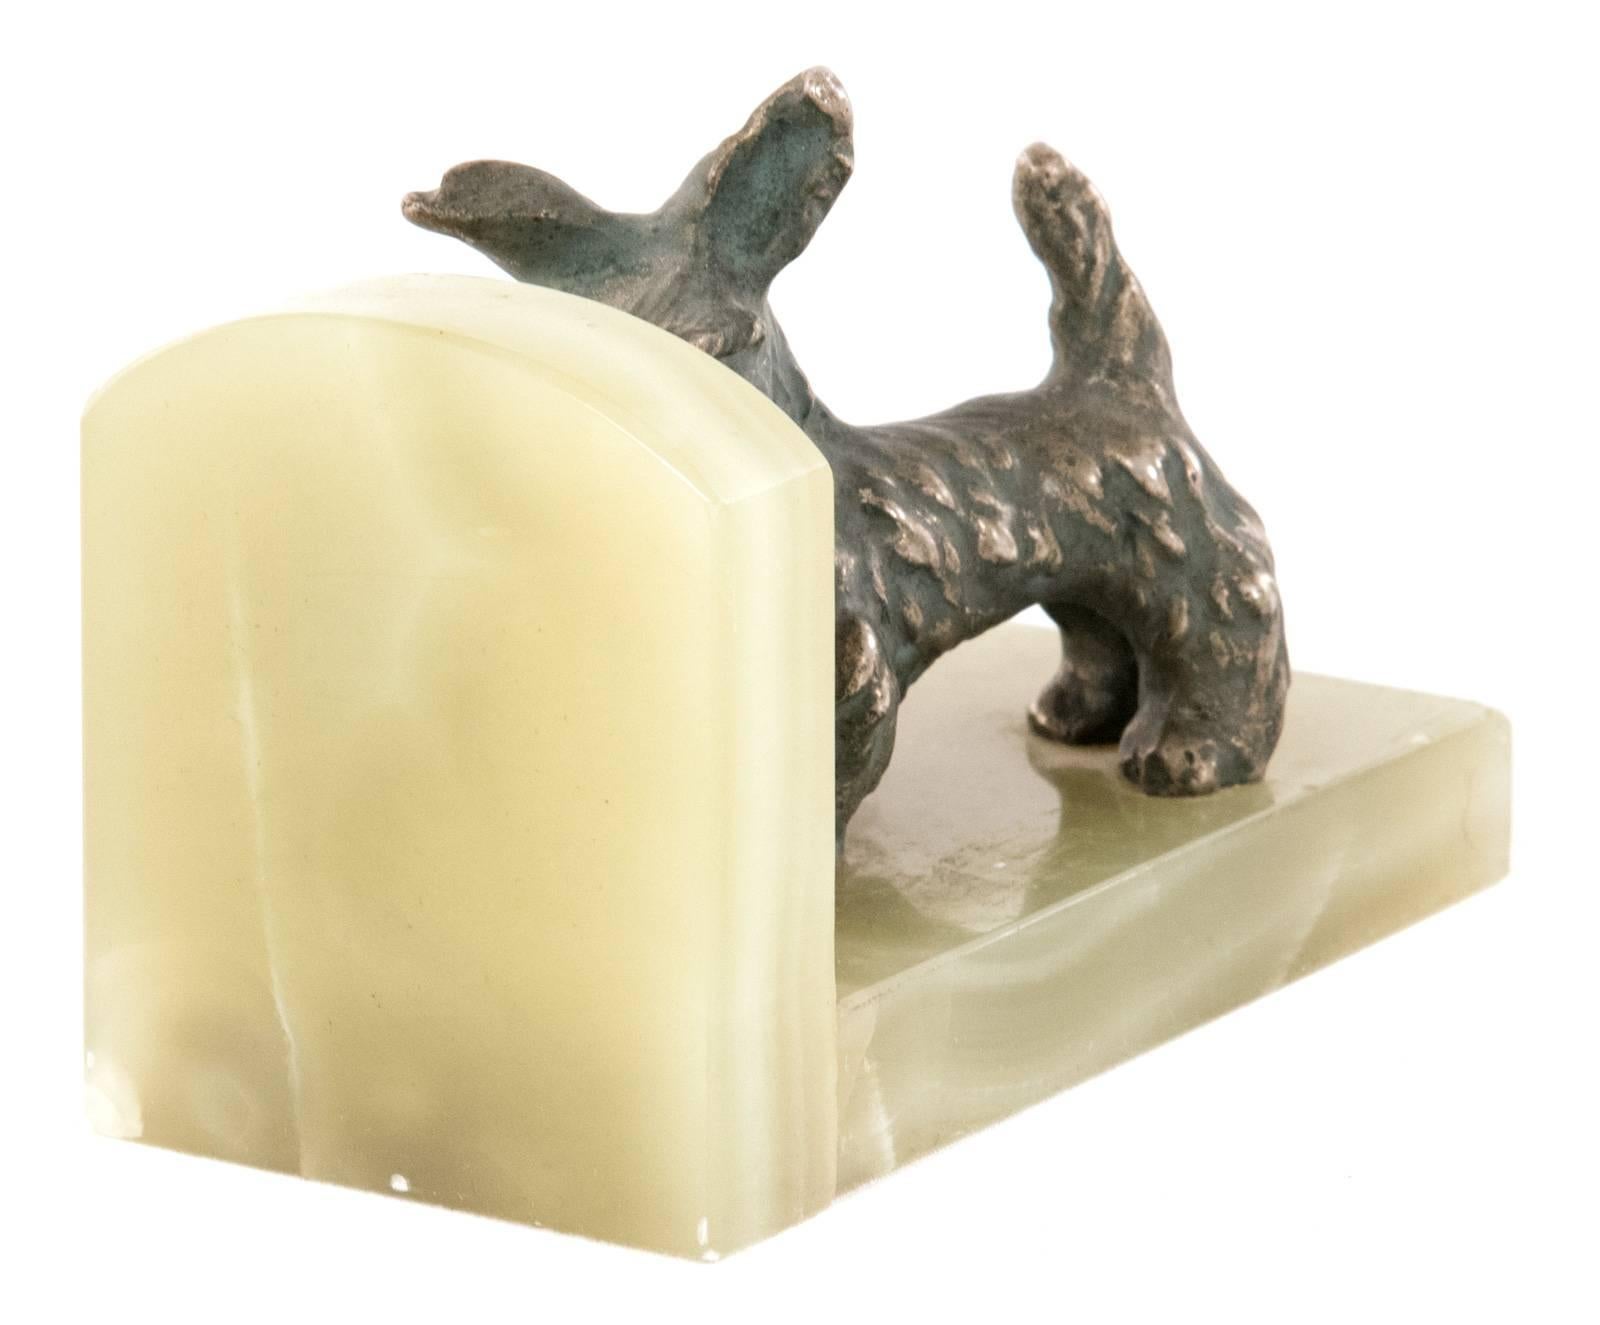 A pair of bookends in the form of bronze Scottish terrier figurines mounted on an onyx base.